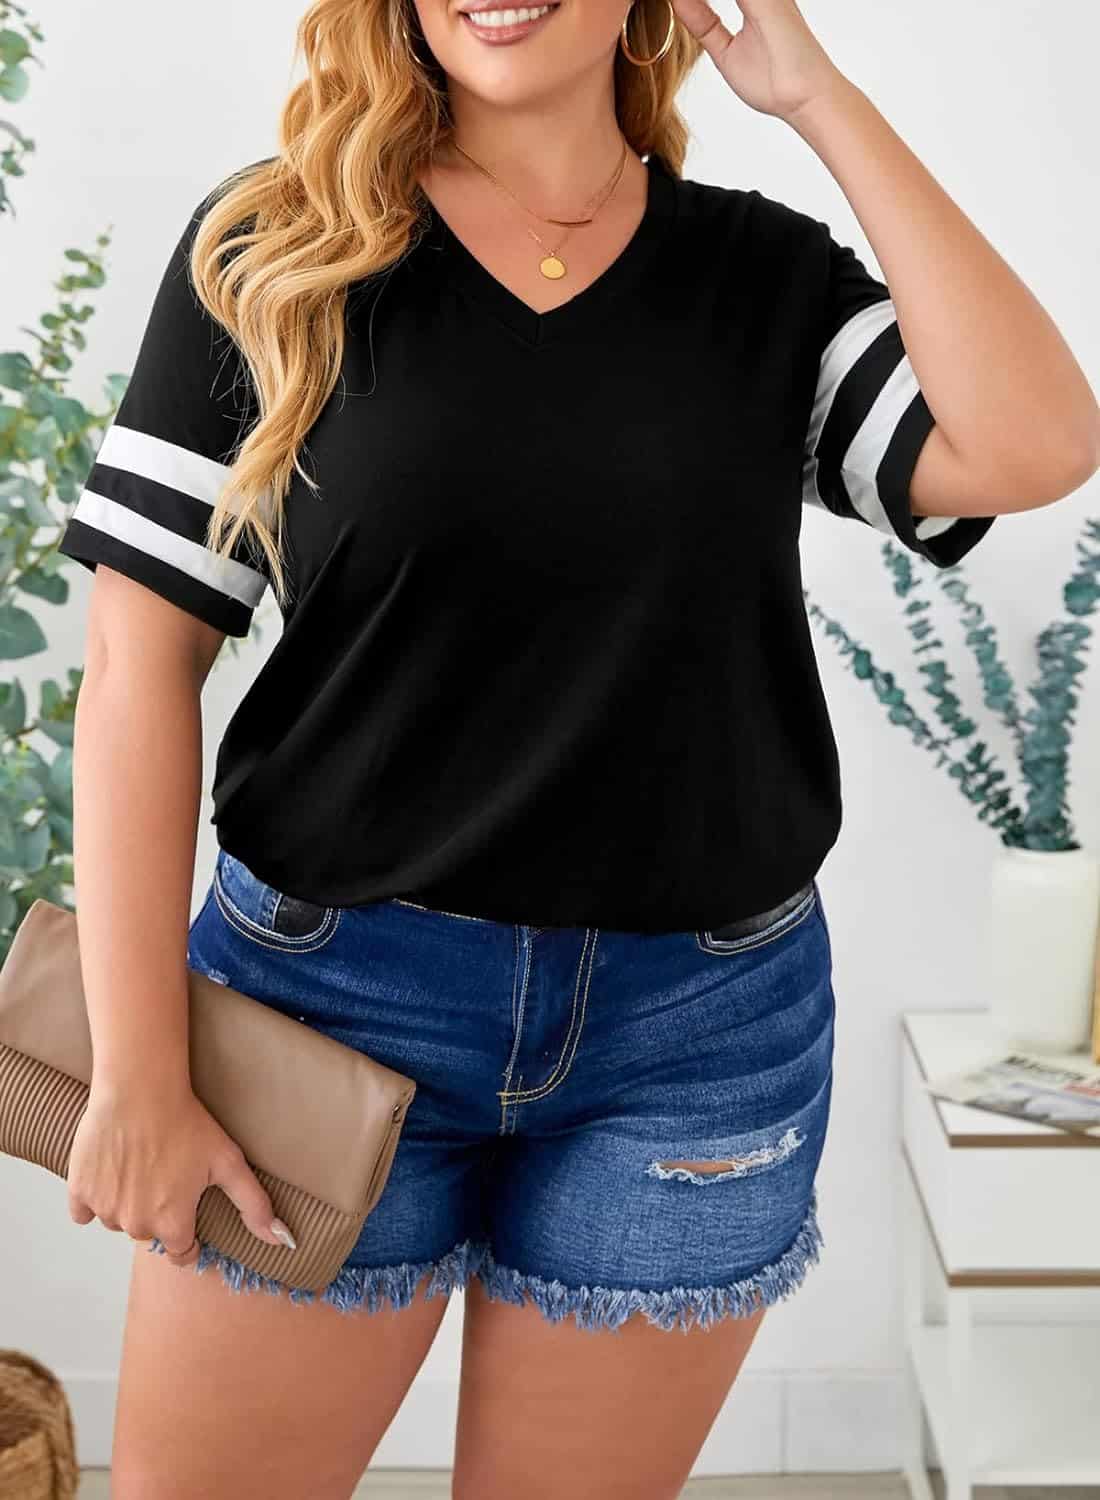 MyFav Women's T-Shirts Plus Size Short Sleeve Crew Neck Striped Tee: A Review